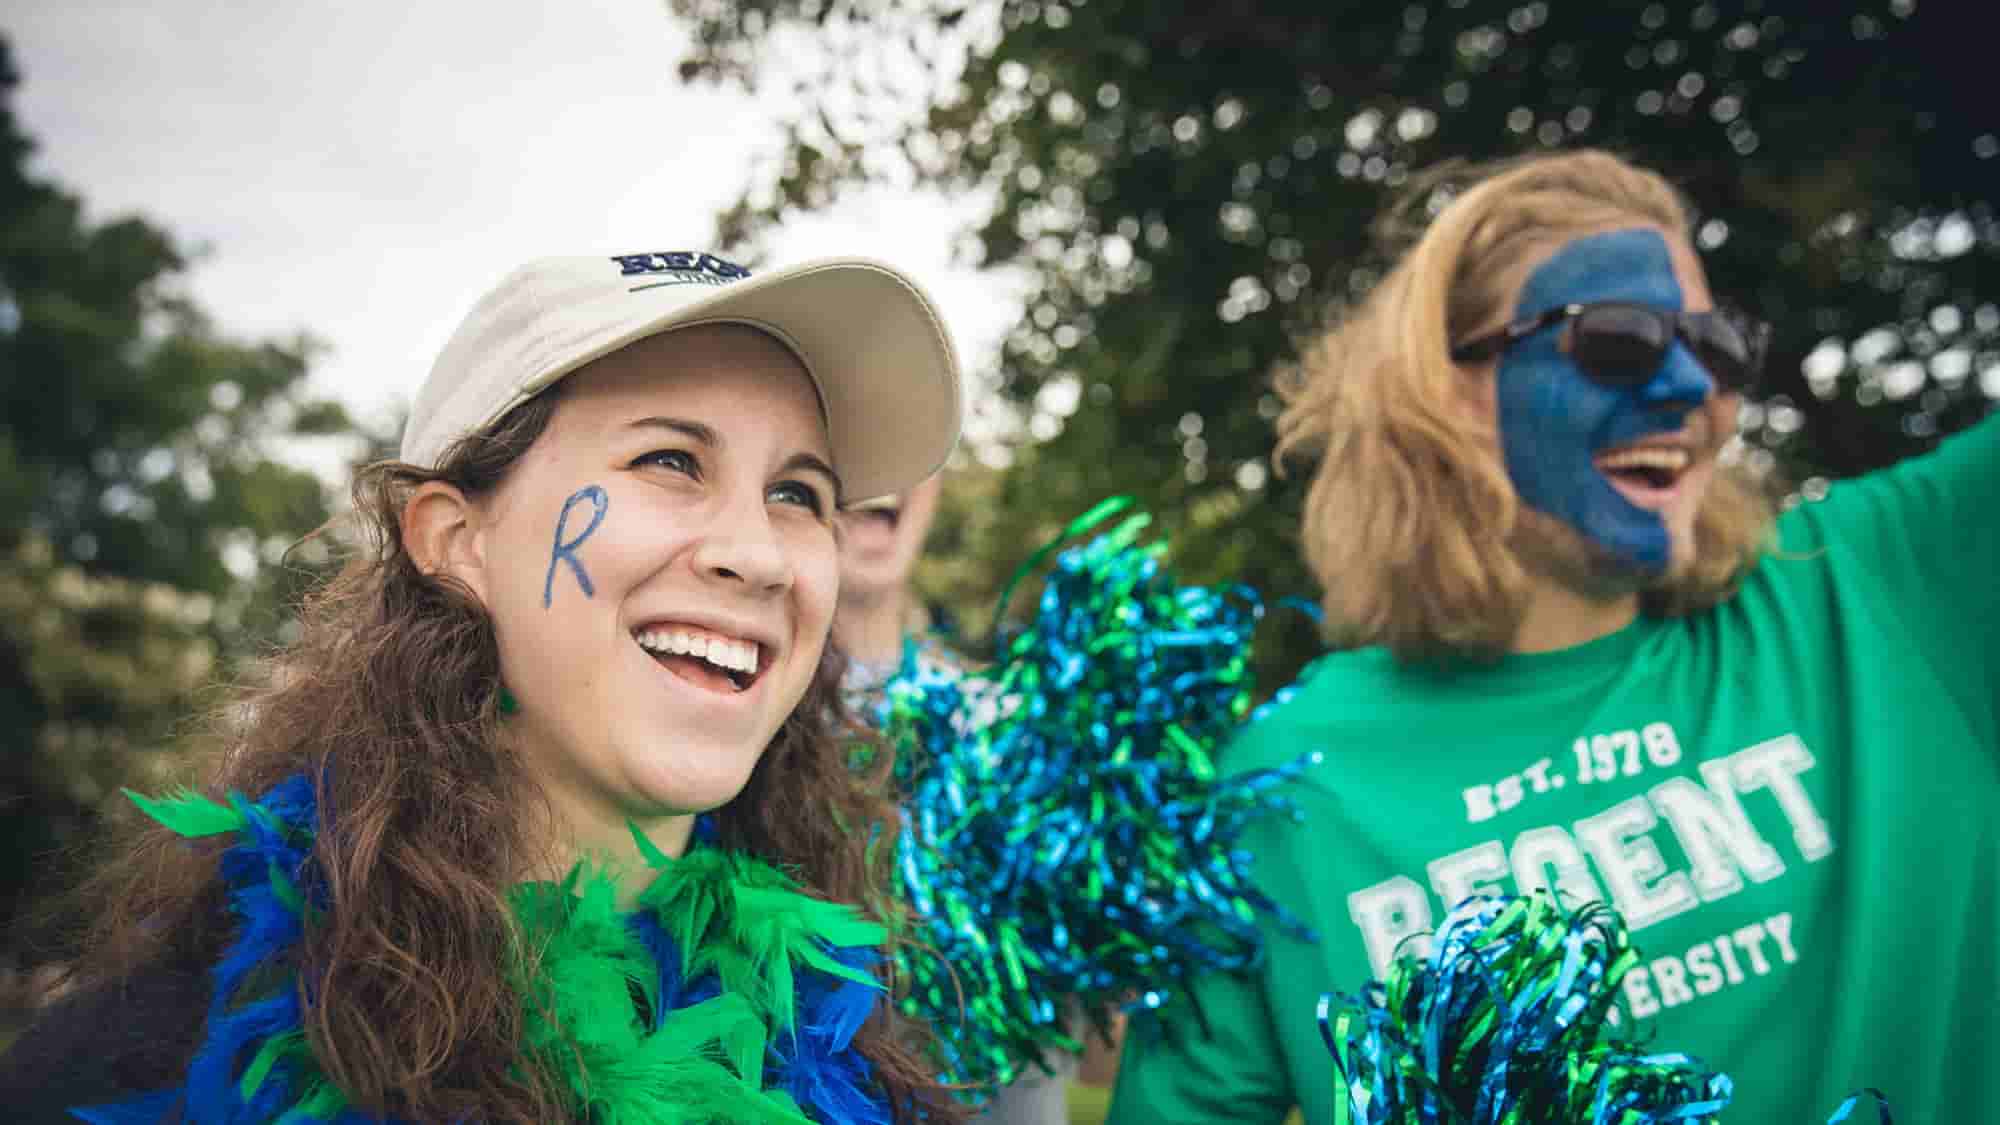 Regent University Pep Rally on campus in Virginia Beach, VA. Be a Royal for a weekend at College Preview Weekend.